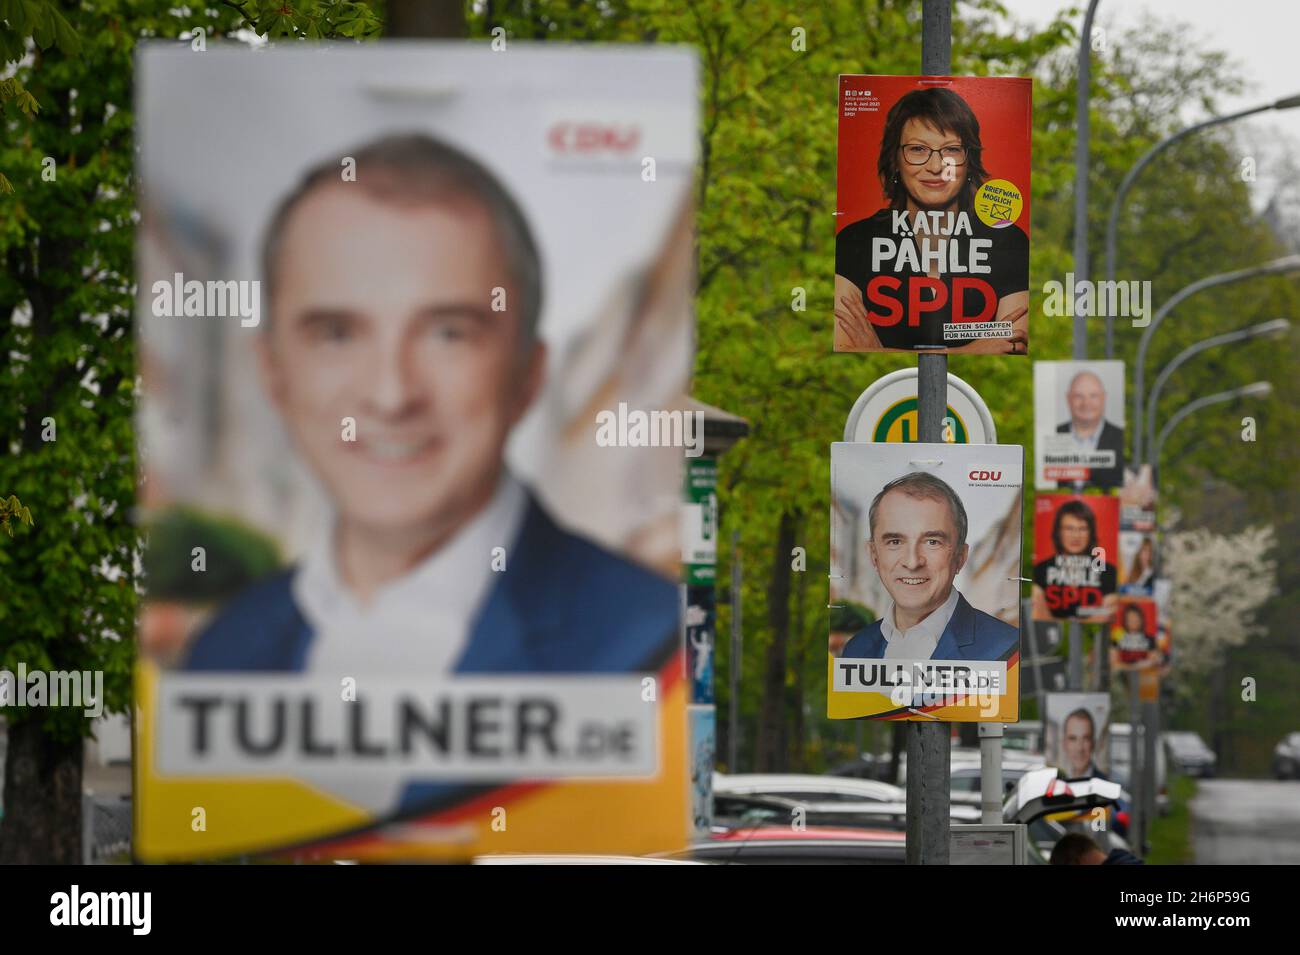 Halle (Saale) in Saxony-Anhalt with political candidate posters on display for State Elections in June 2021. Stock Photo